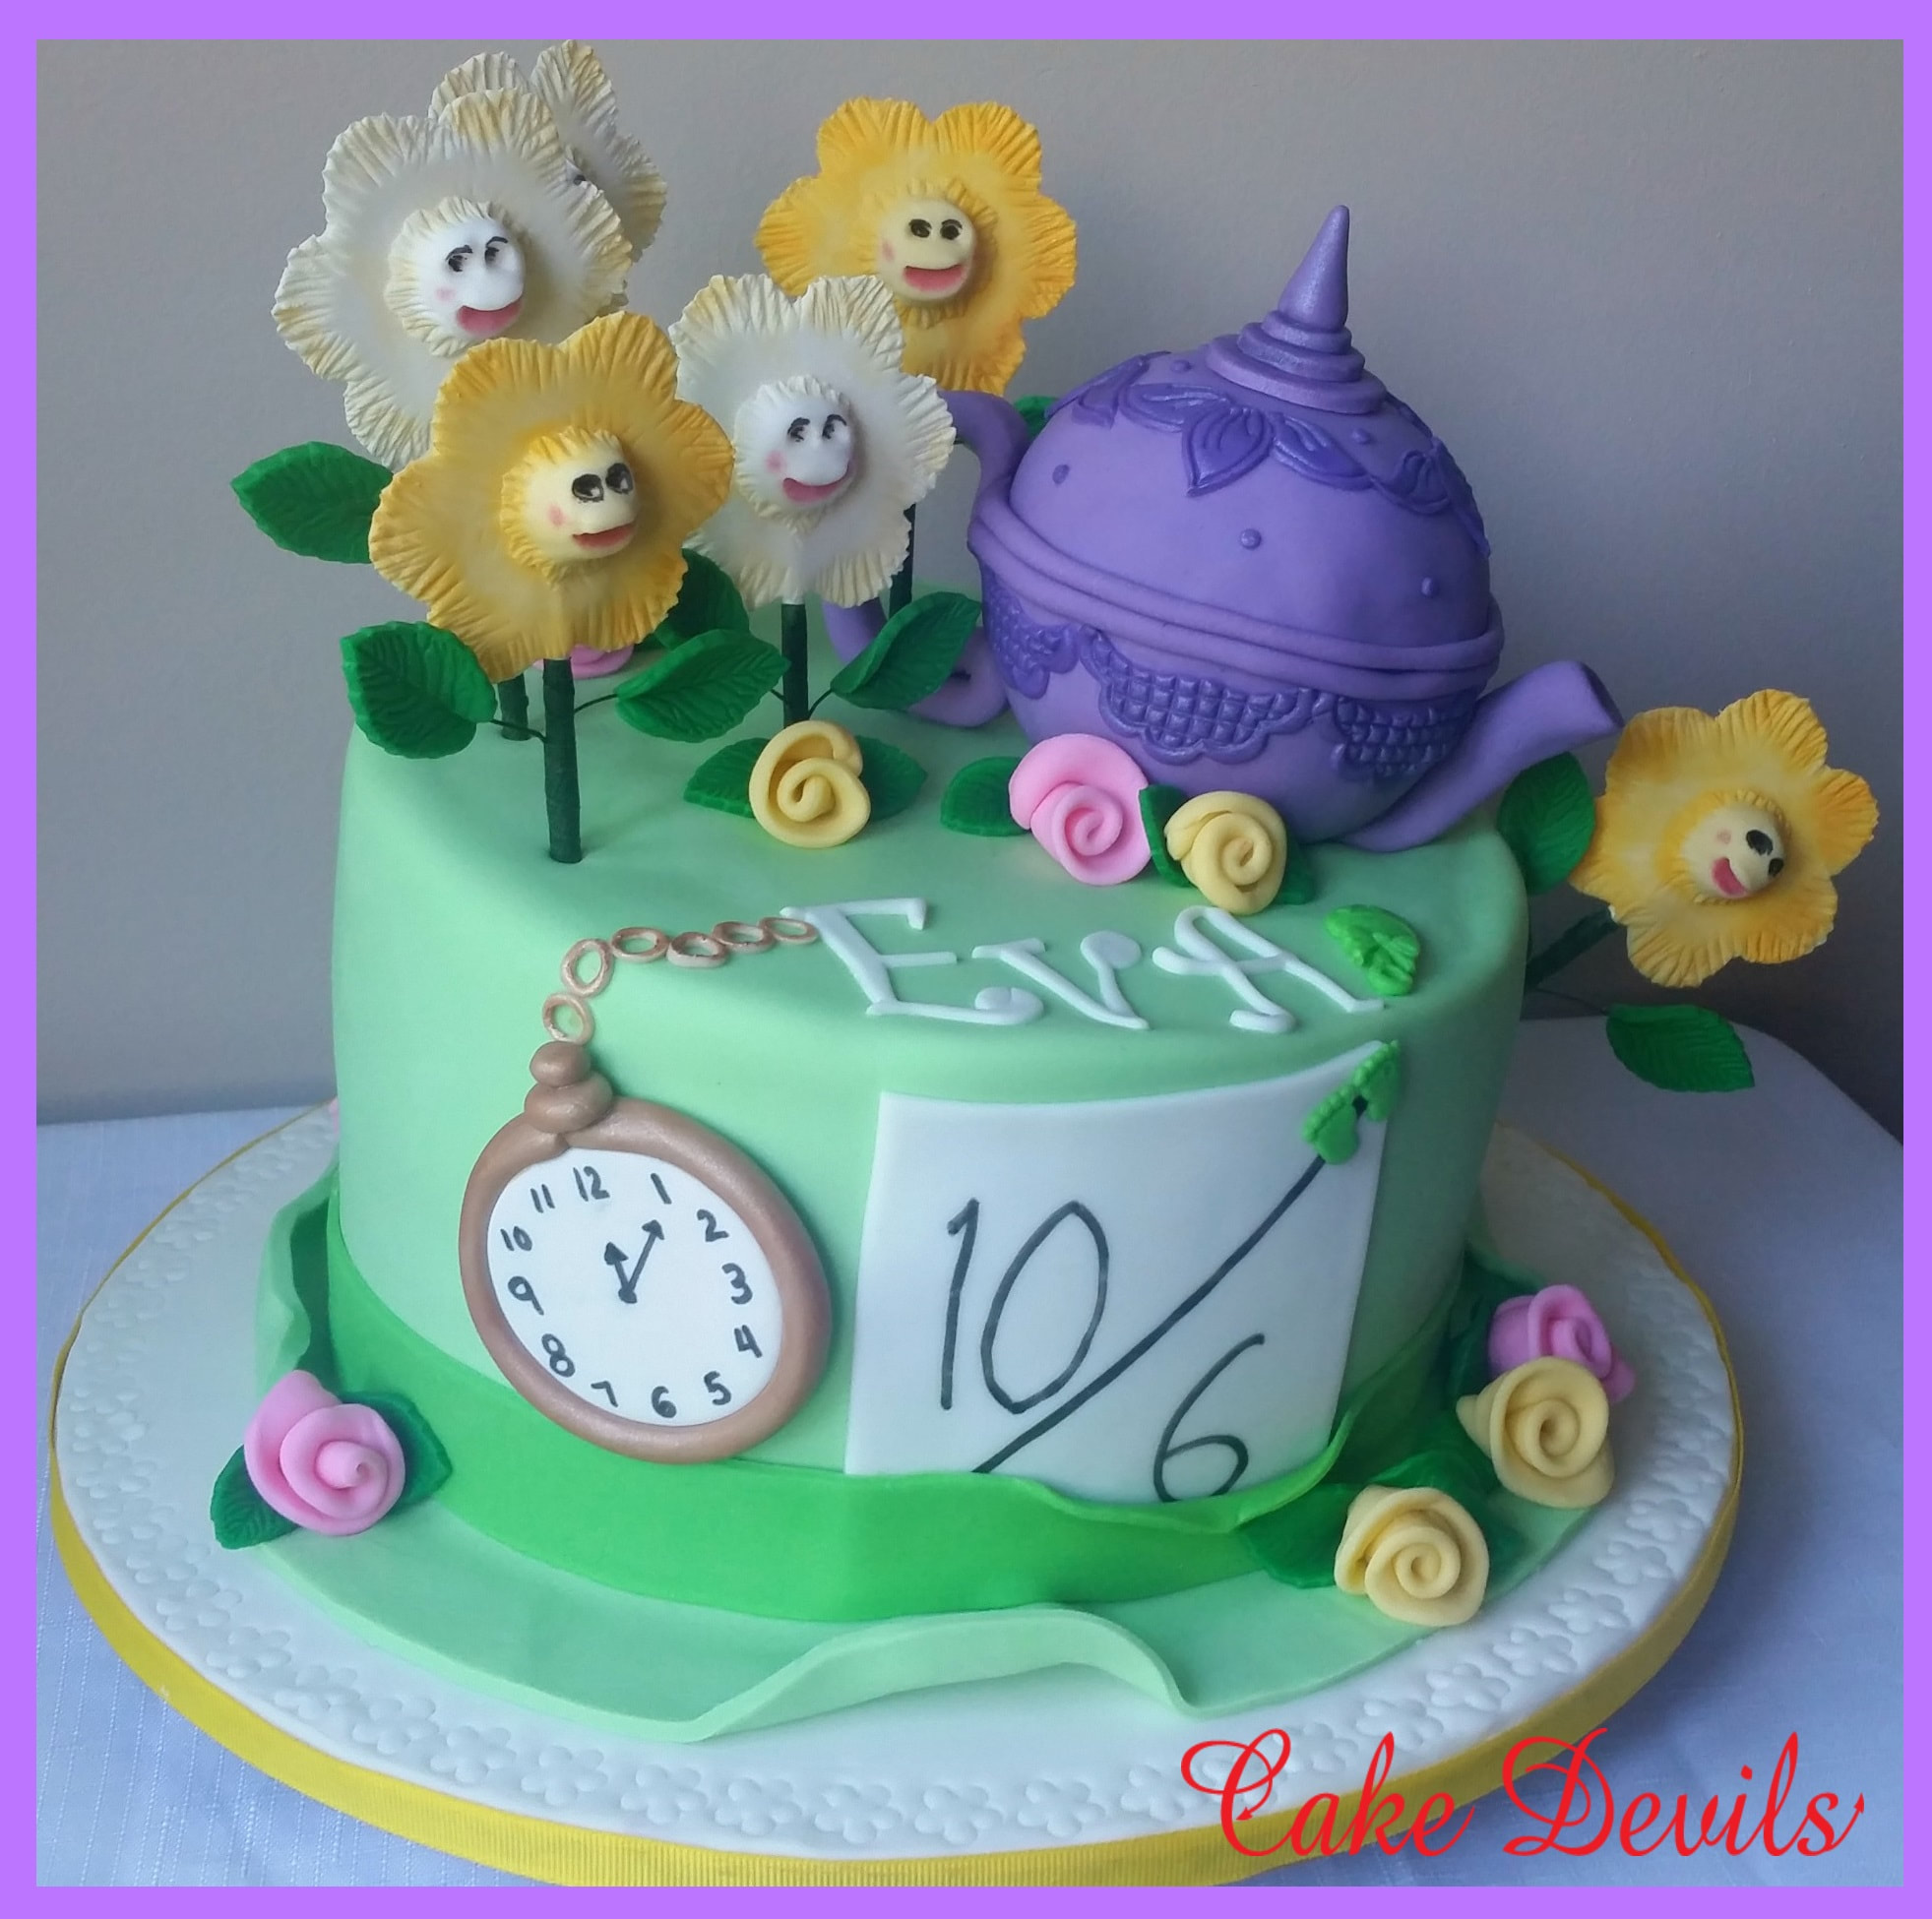 Top Mother's Day Tea Party Cakes - CakeCentral.com